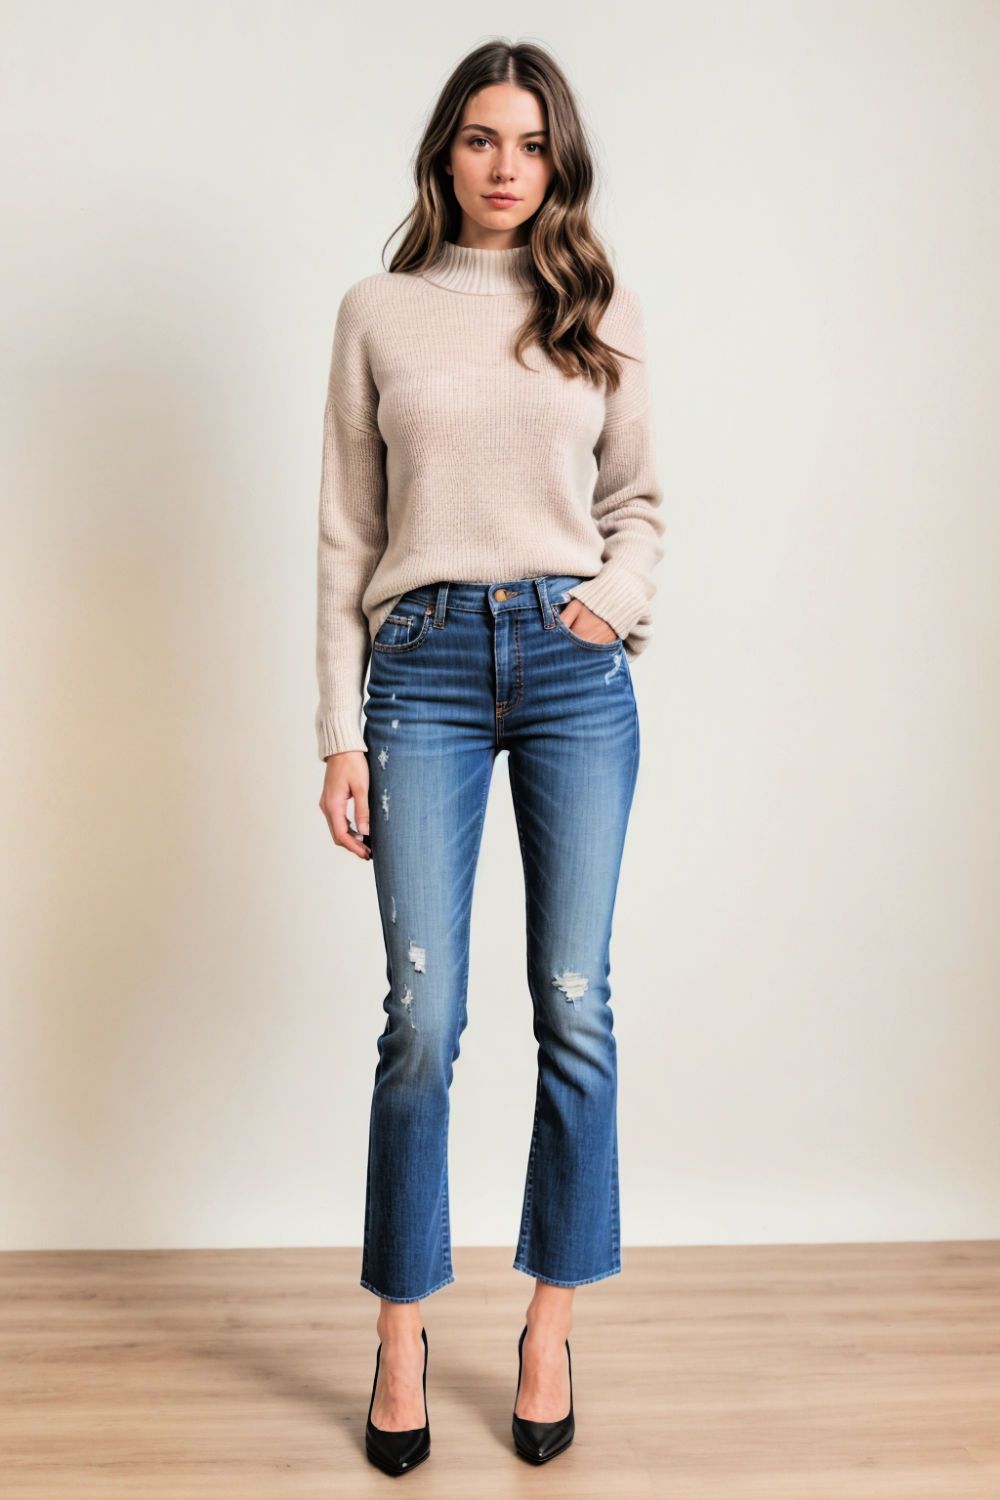 retro inspired chic bootcut jeans